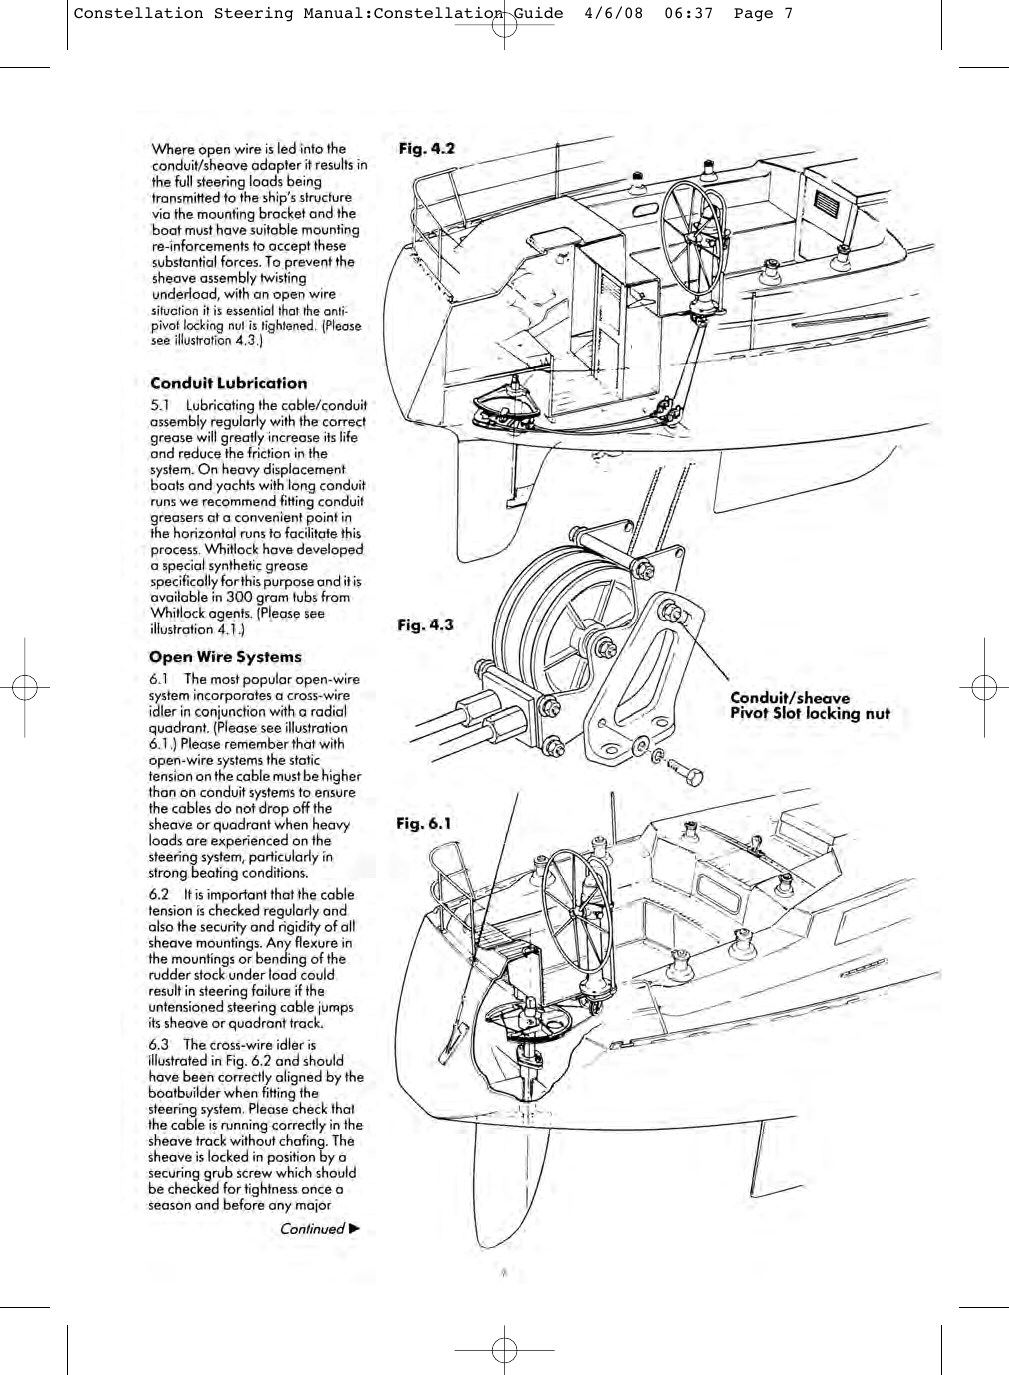 Page 7 of 8 - Constellation Steering Manual:Constellation Guide Constellation-Steering-Manual